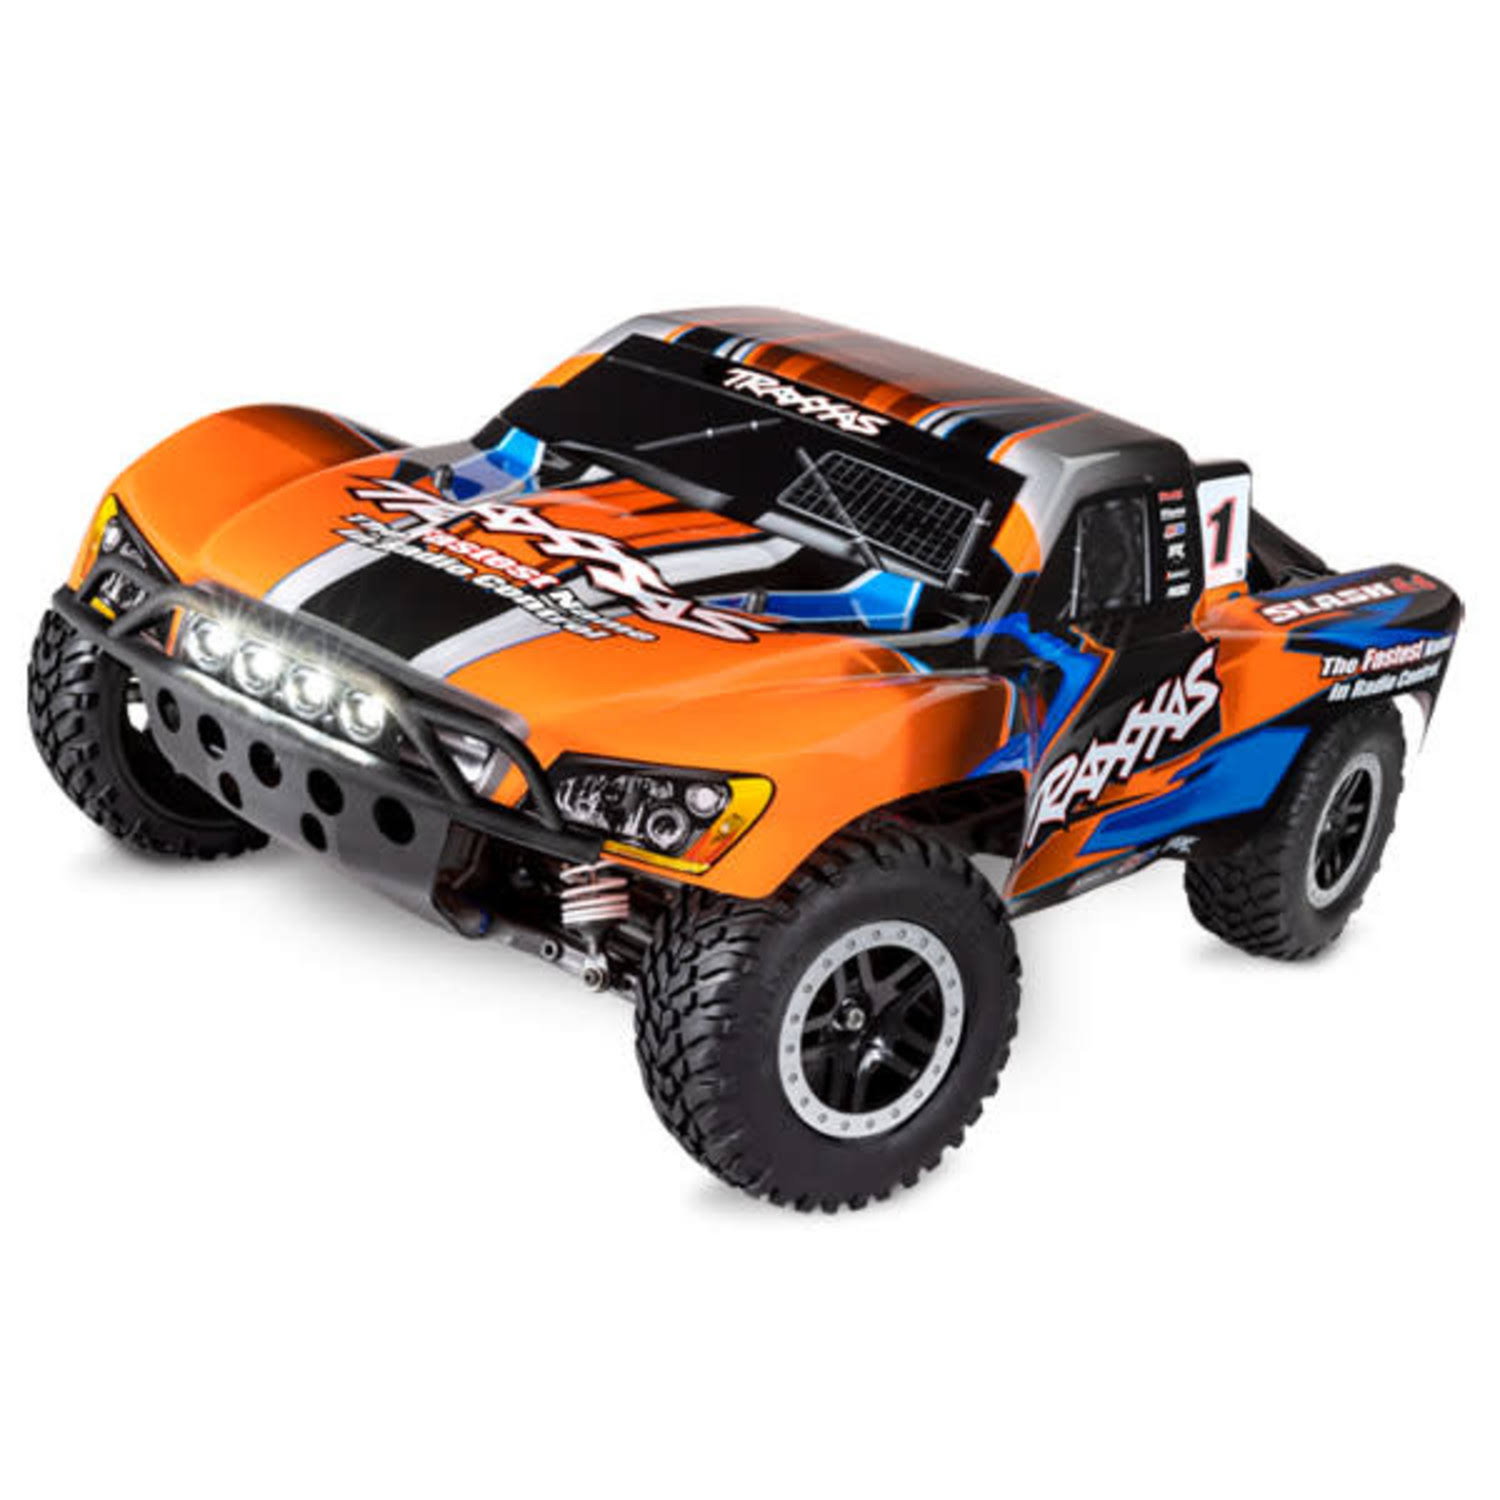 TRAXXAS TRA 68054-61-ORNG Slash 4X4: 1/10 Scale 4WD Electric Short Course Truck. Ready-to-Race with TQ 2.4GHz Radio System, XL-5 ESC (fwd/rev), and